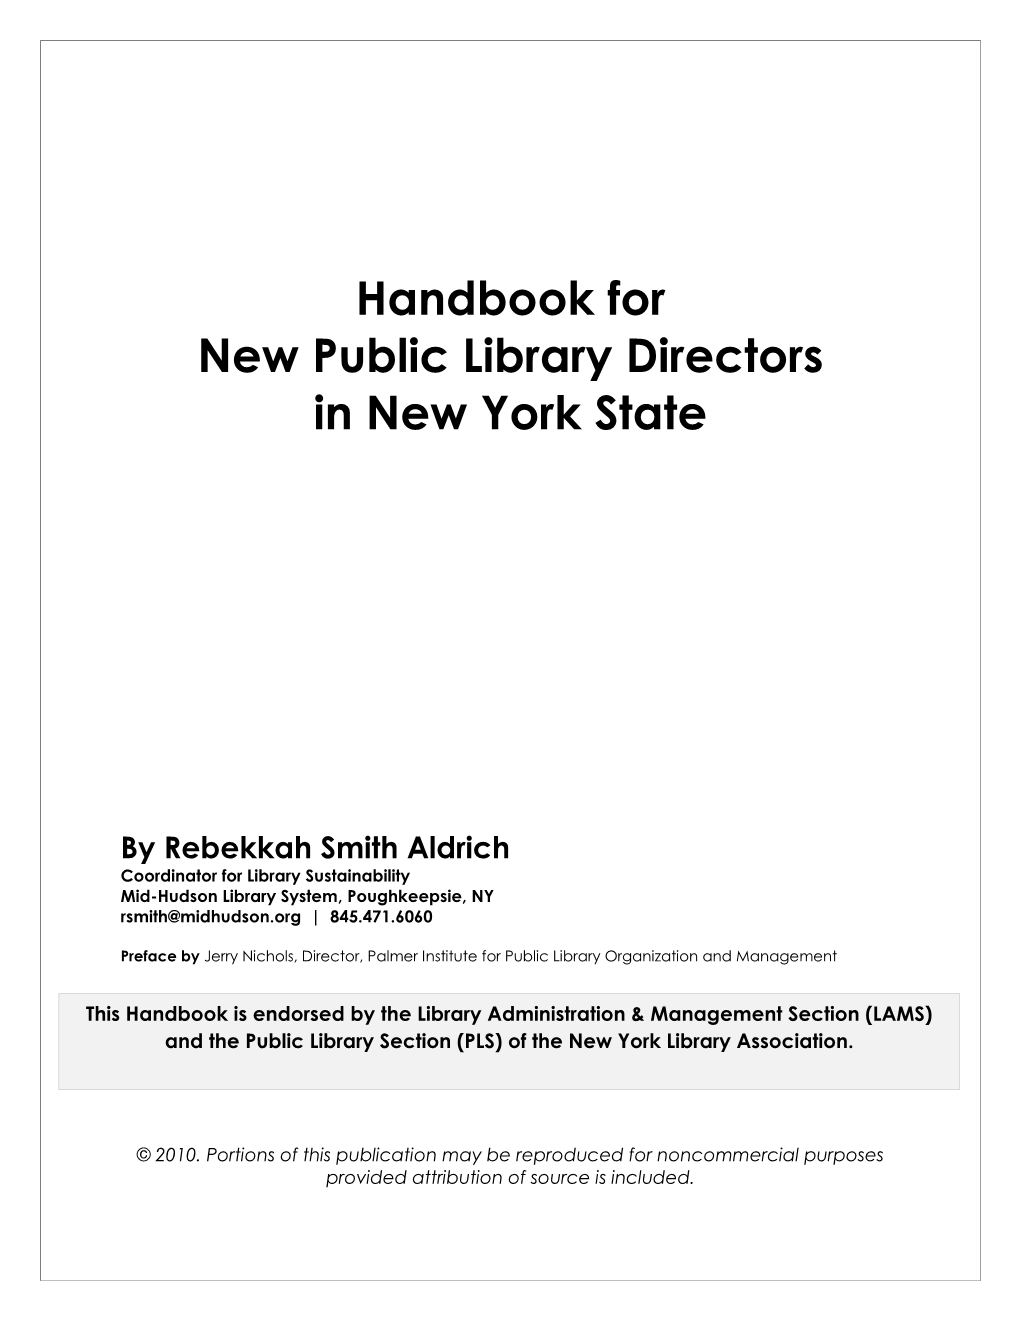 Handbook for New Public Library Directors in New York State